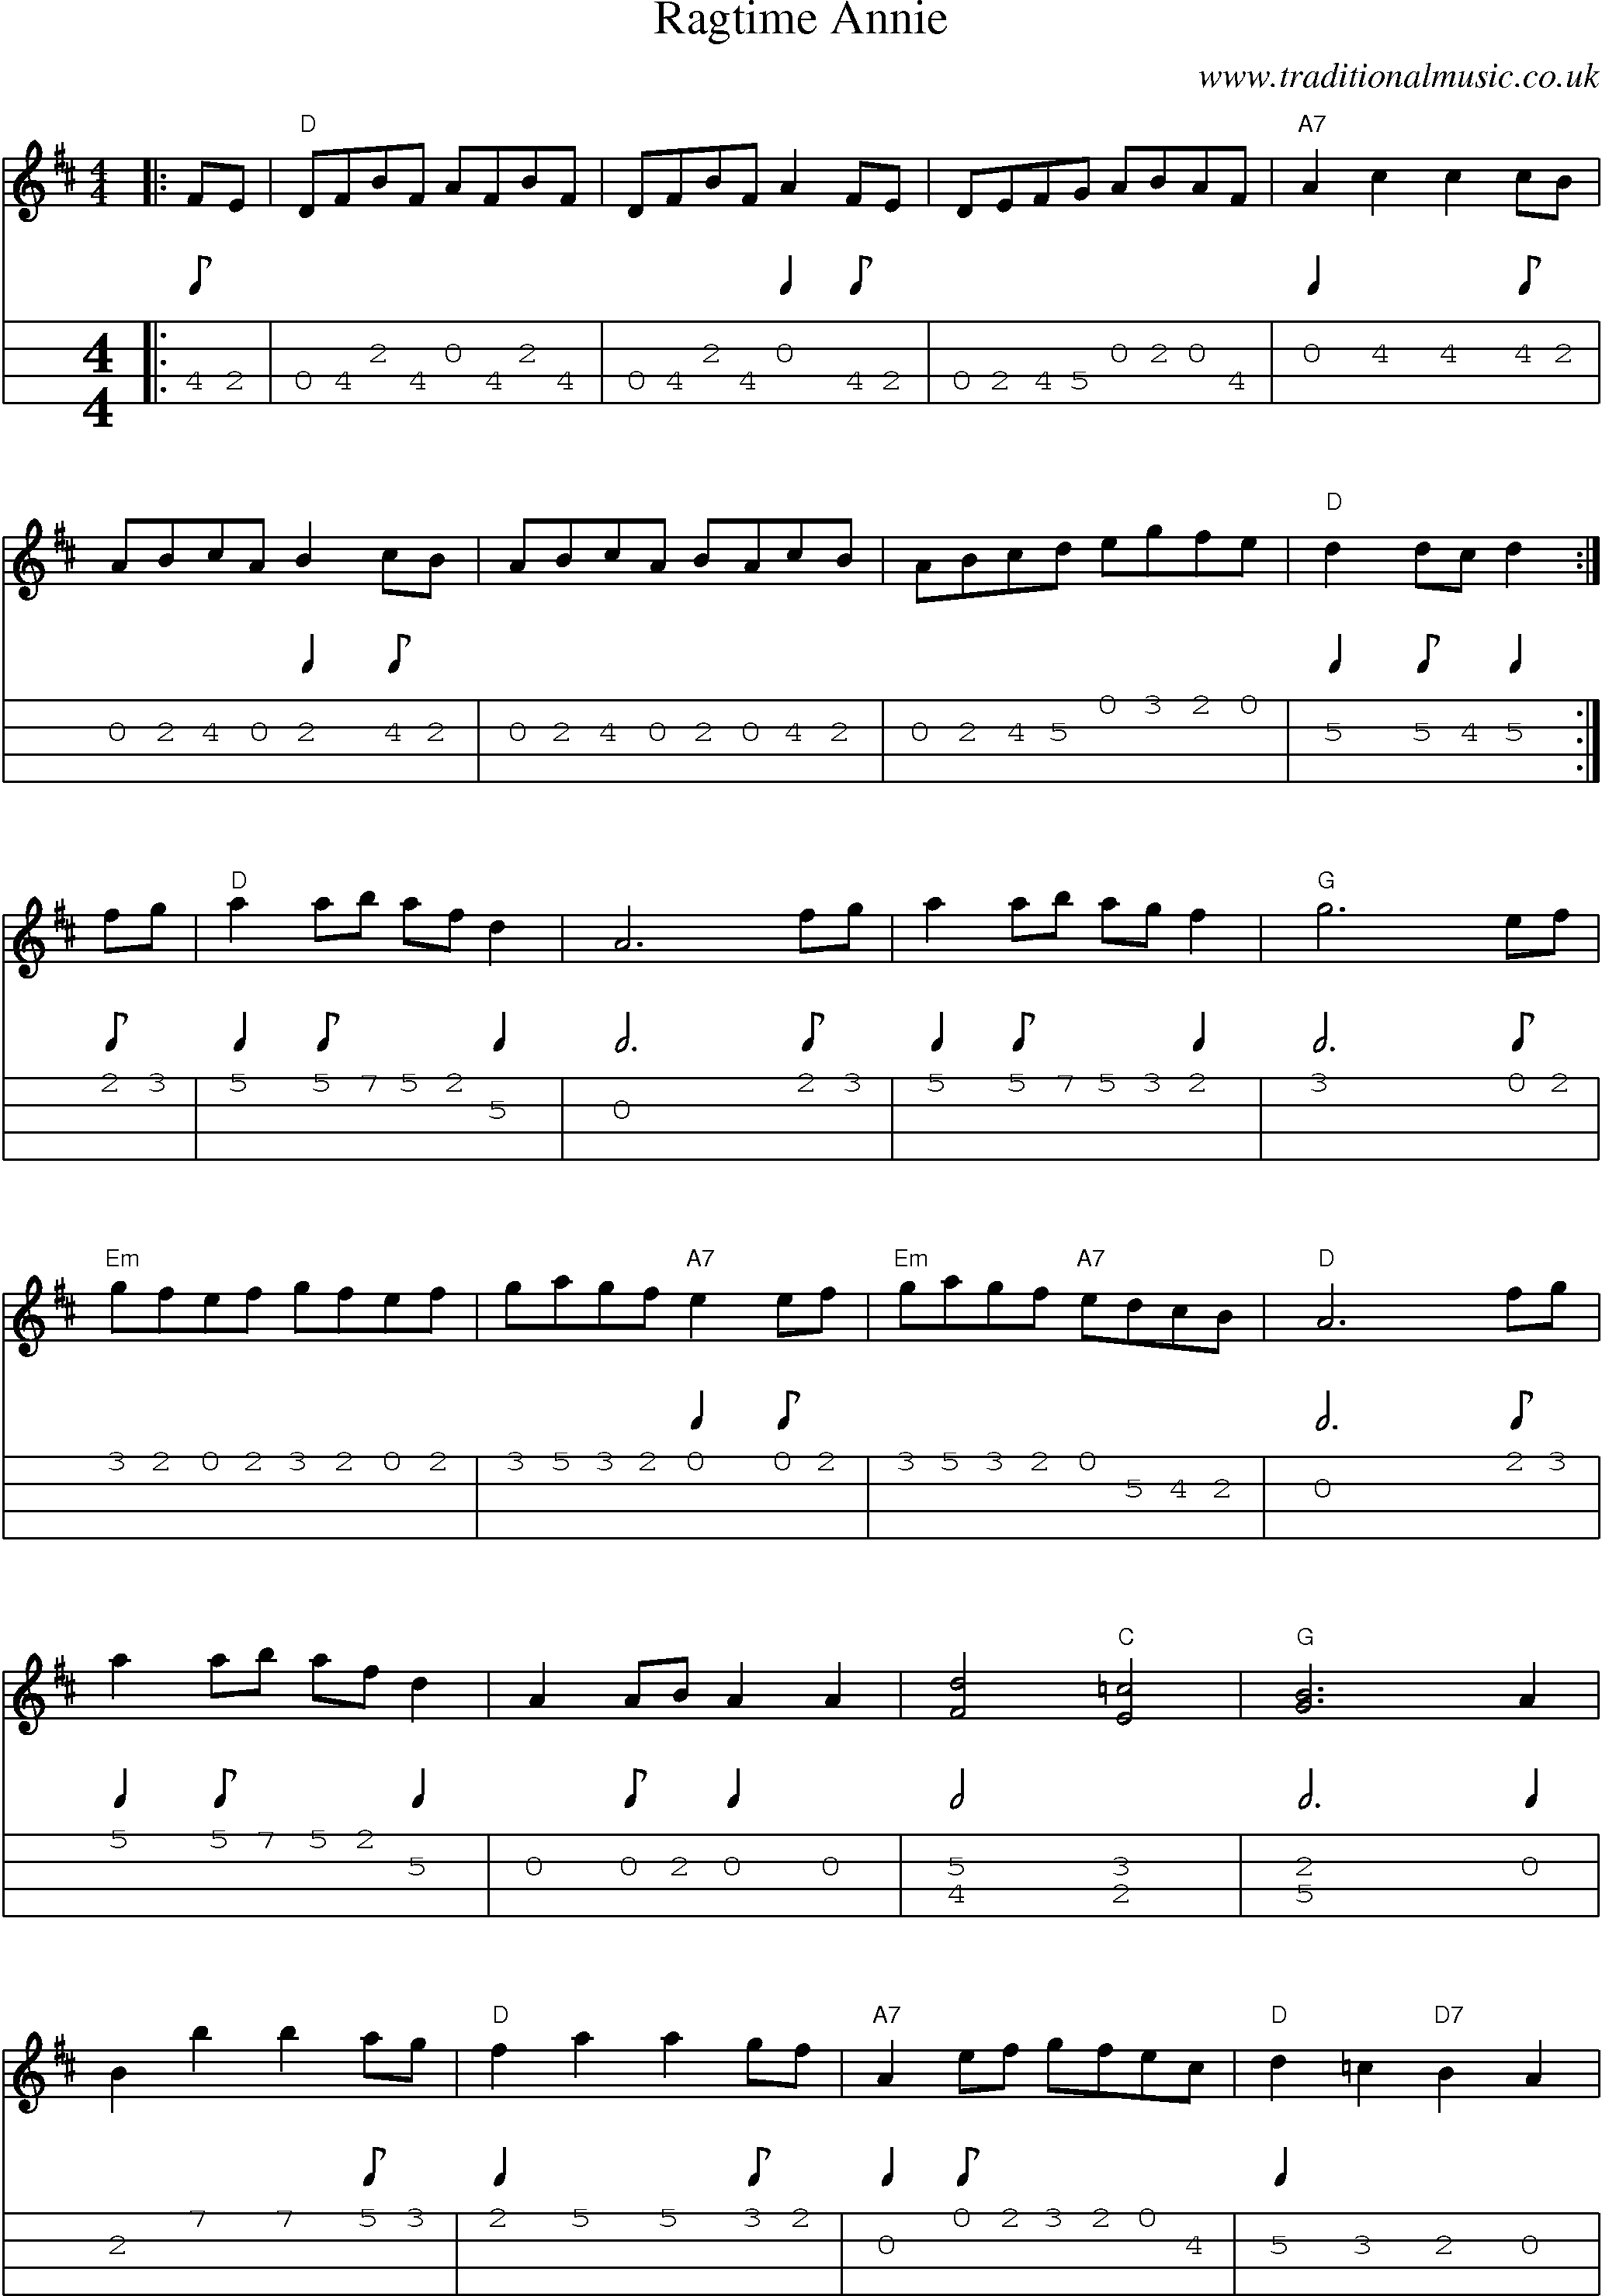 Music Score and Mandolin Tabs for Ragtime Annie